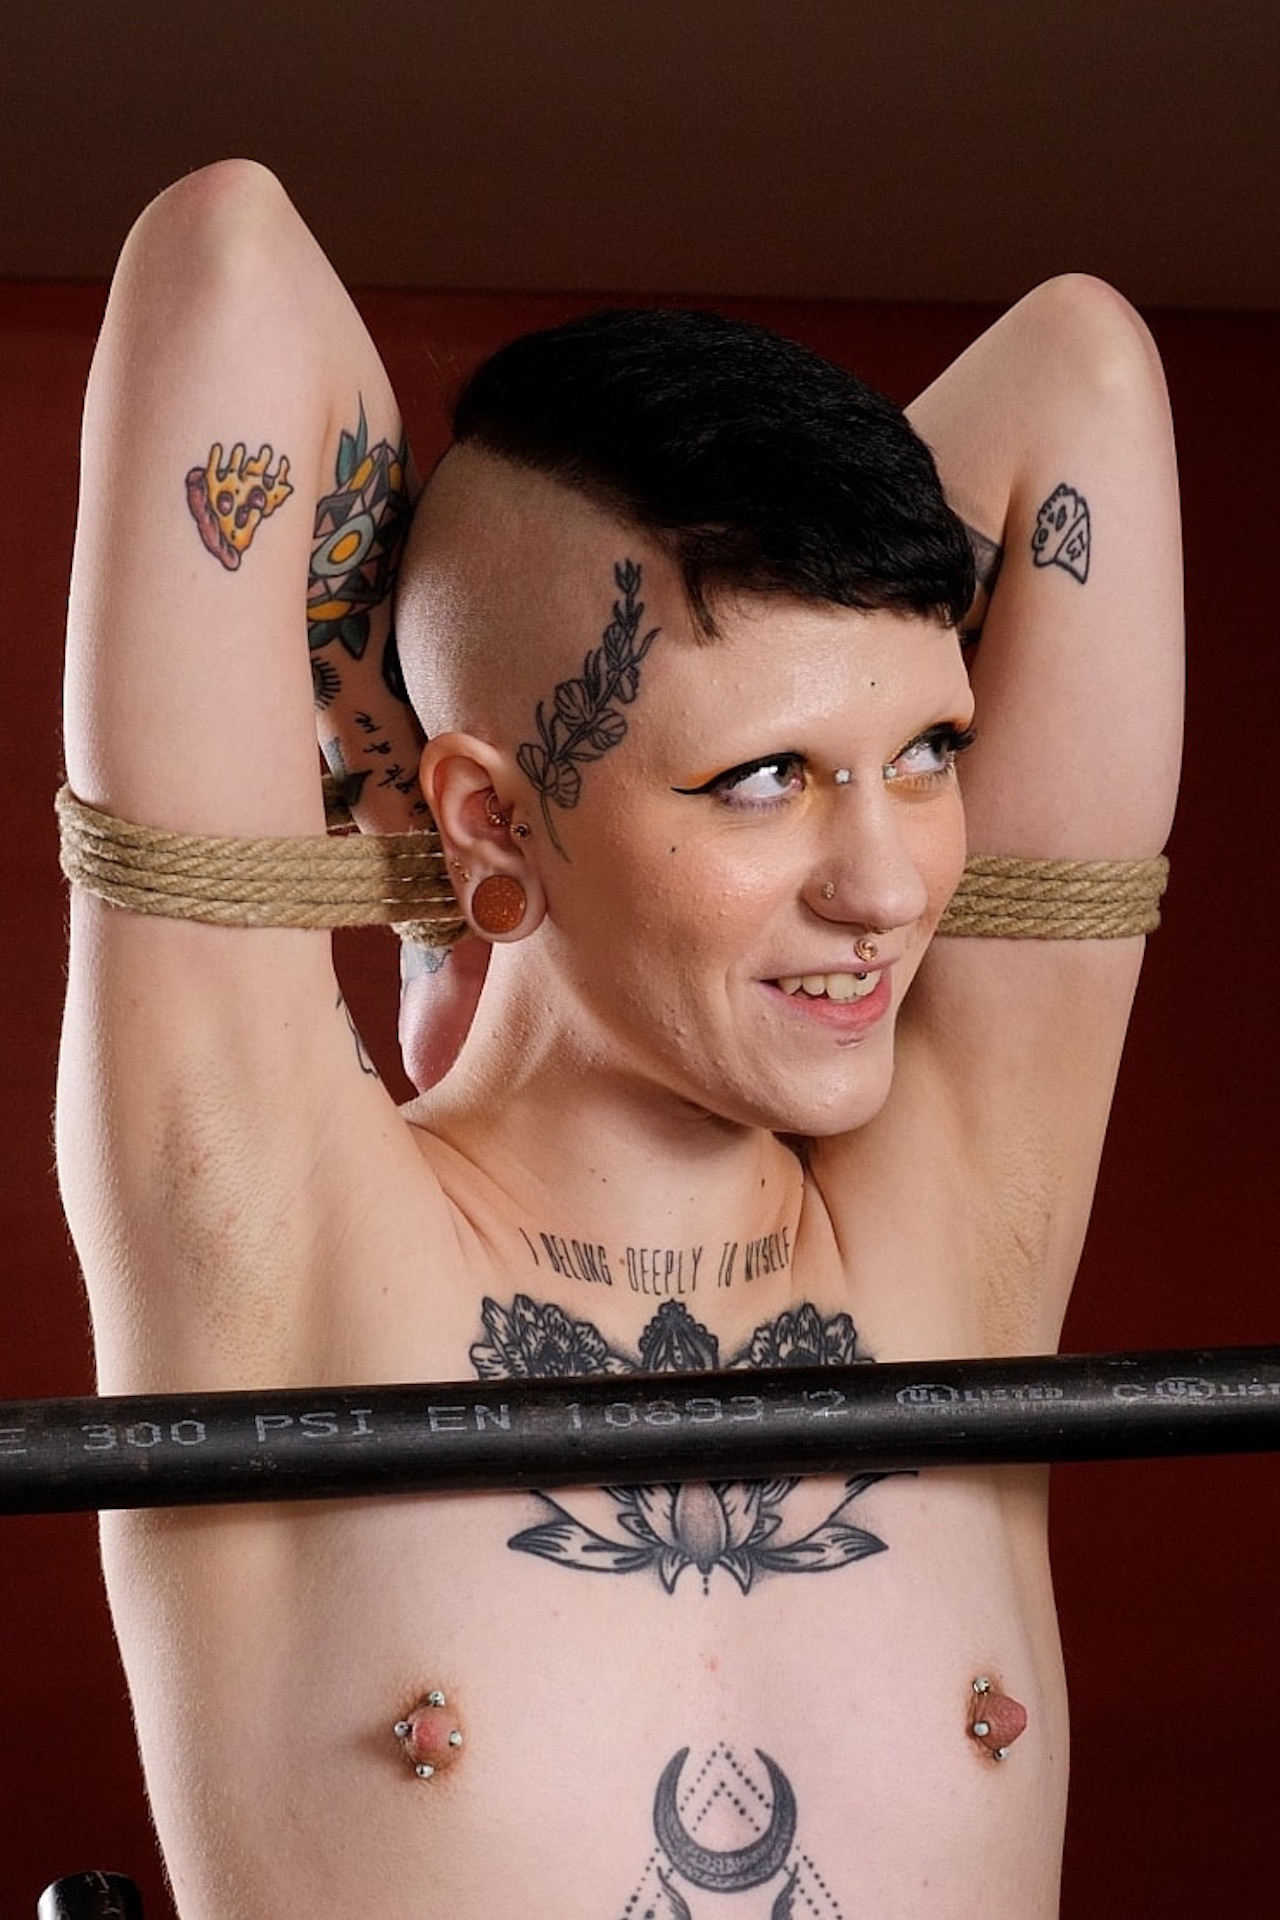 Portrait of naked tattooed person with small breasts and nipple piercings. They are tied up.